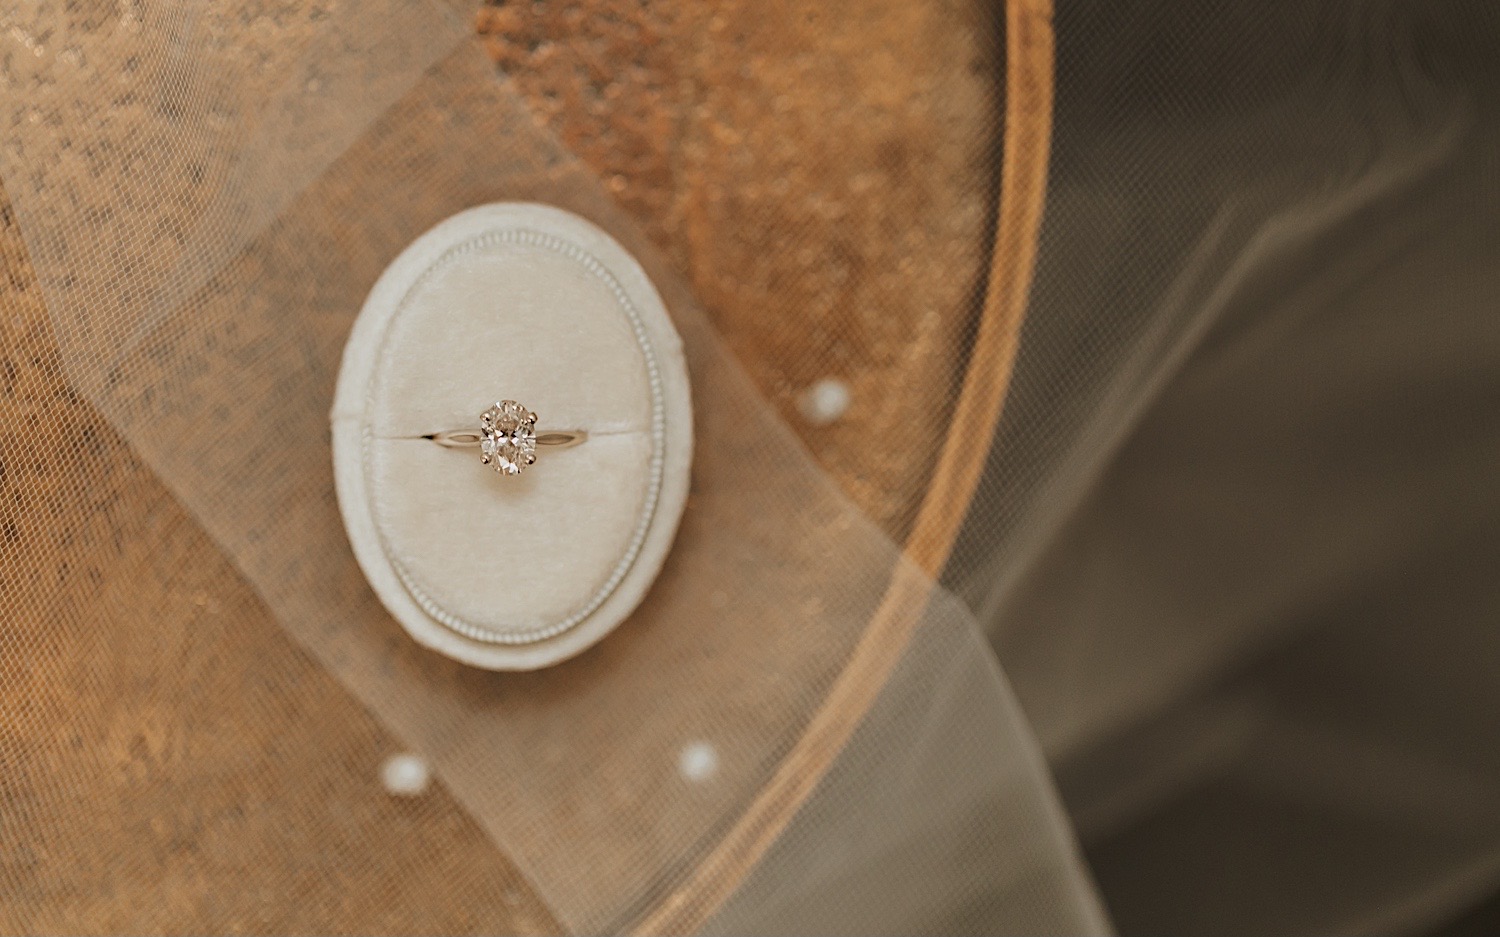 Detail photo of a wedding ring in it's container